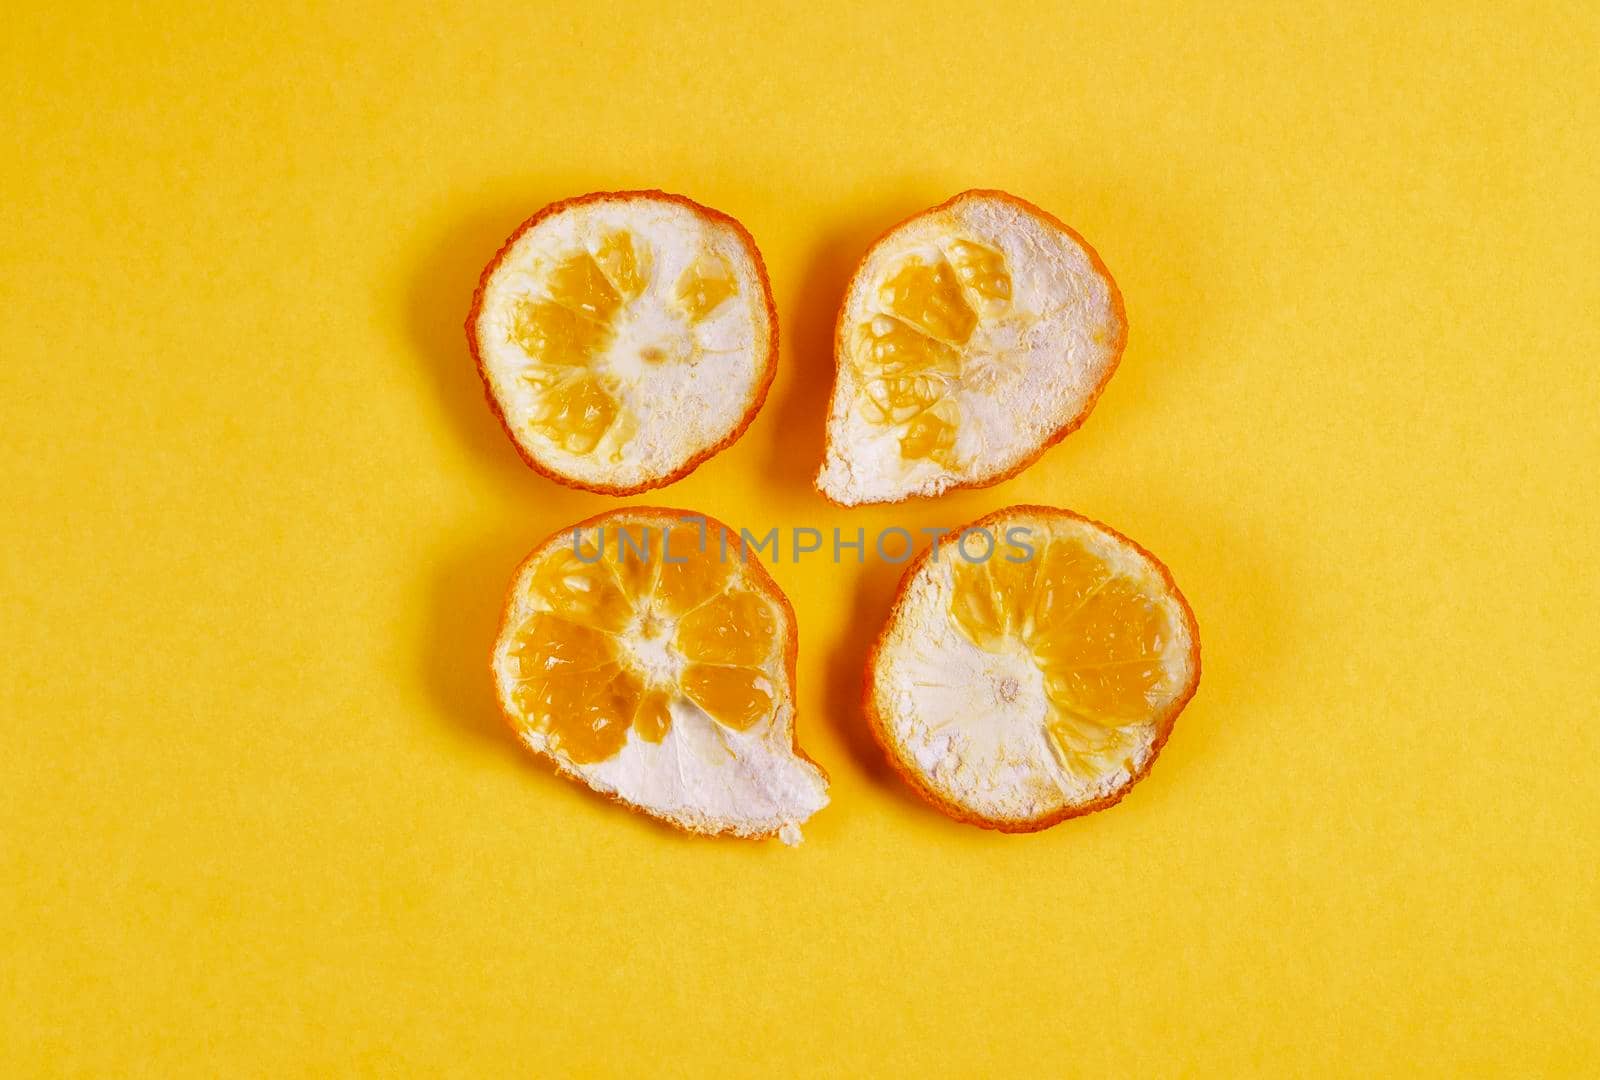 Several pieces of orange pell on yellow background